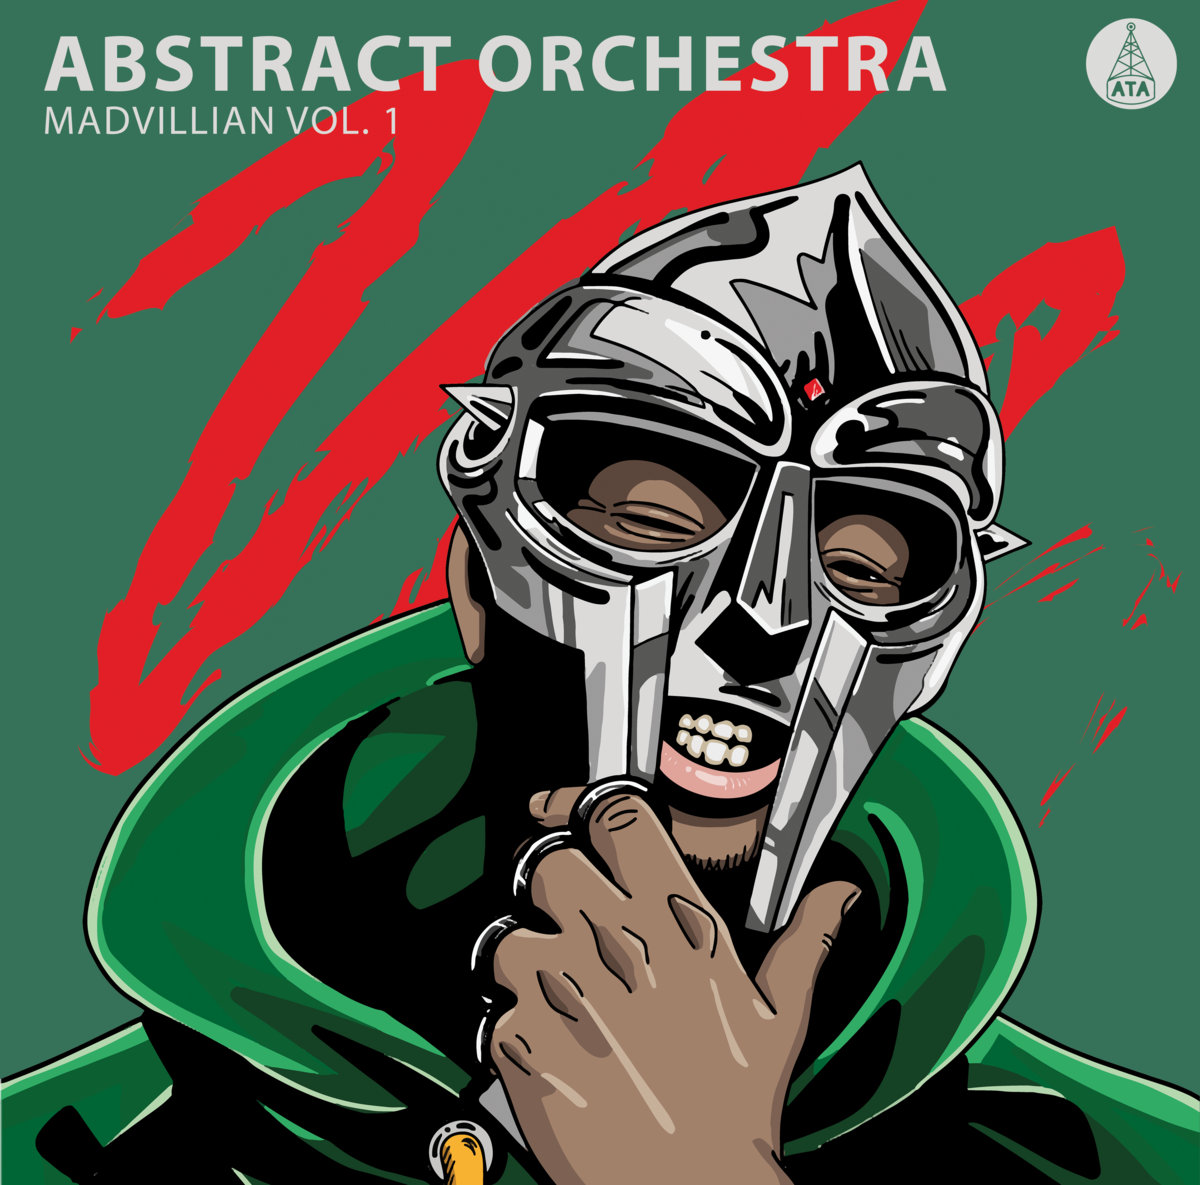 A Jazz Big Band Tribute to Madvillain by Abstract Orchestra (+Free Download)